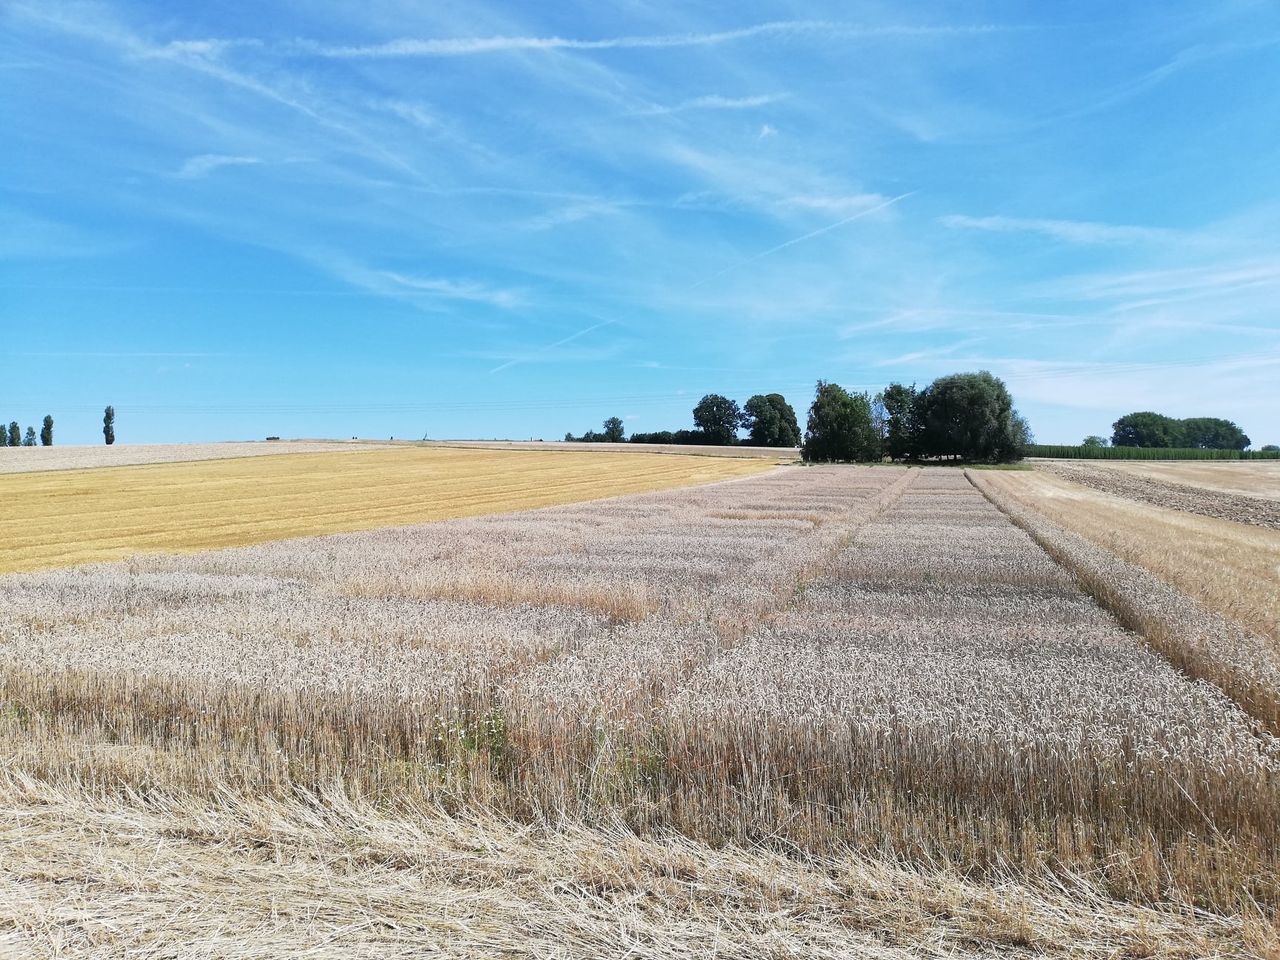 Wheat harvest in Germany